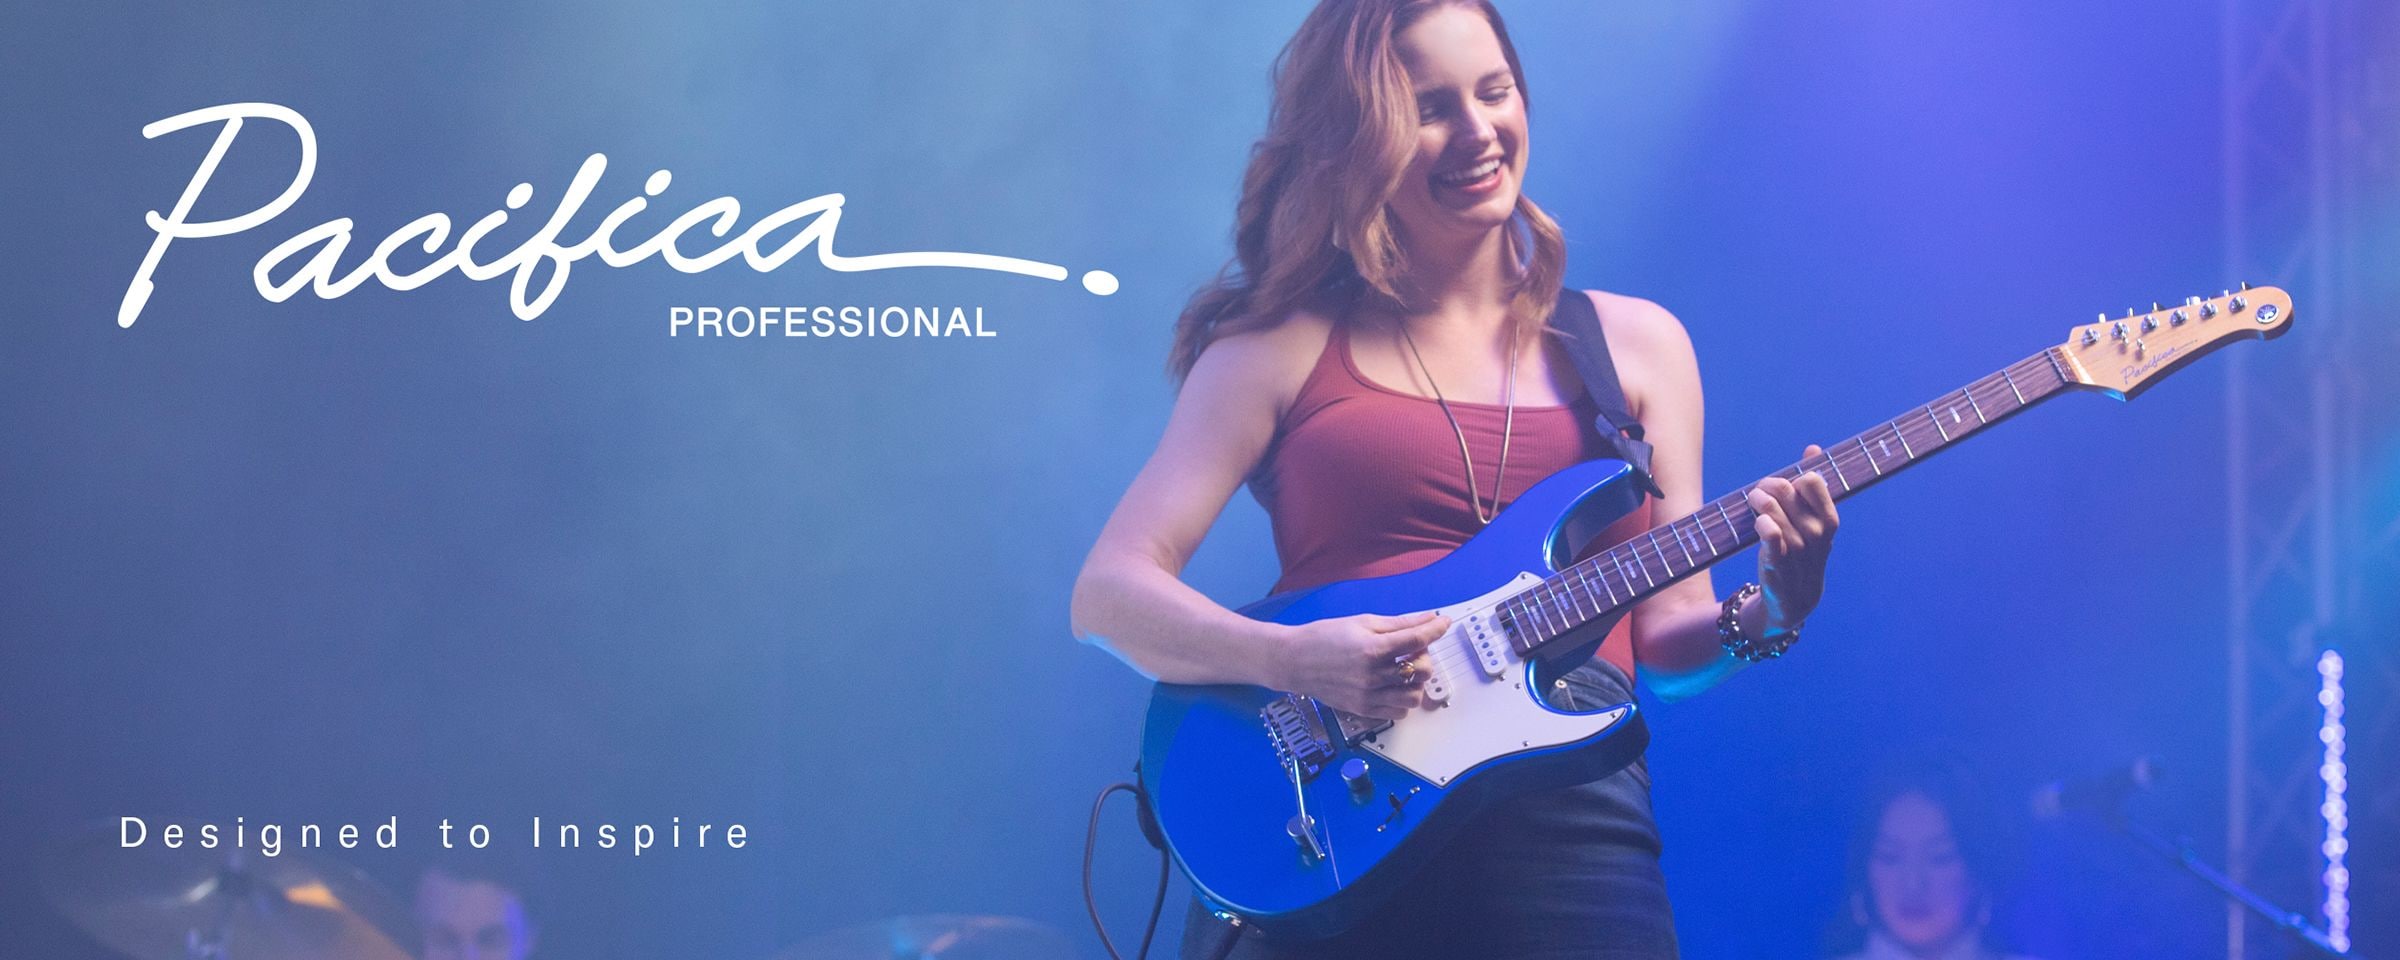 Pacifica professional logo & designed to inspire text. Female on stage performing with Sparkle Blue.